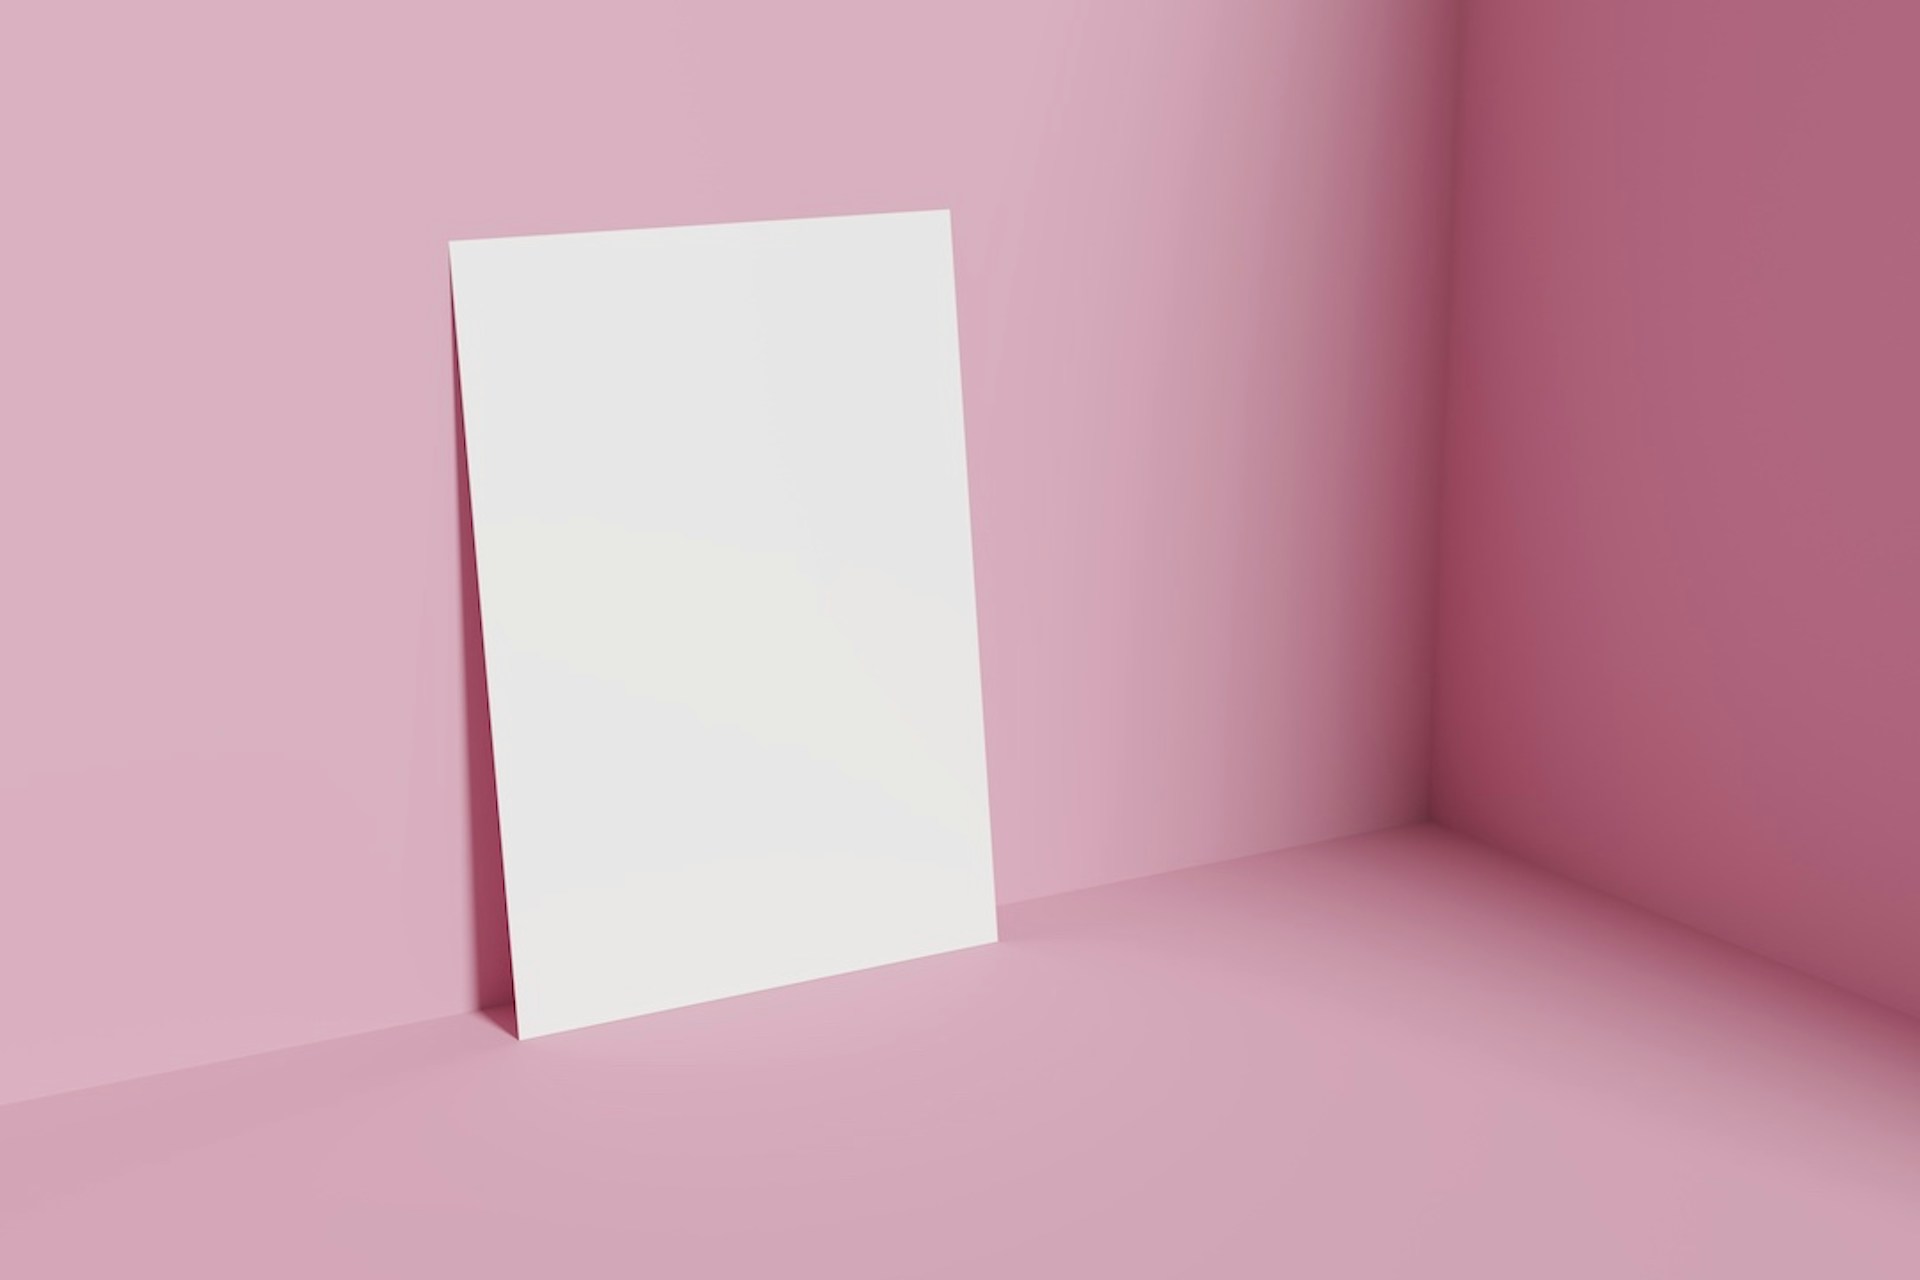 You can see a blank sheet of paper leaning against a wall in a pink room